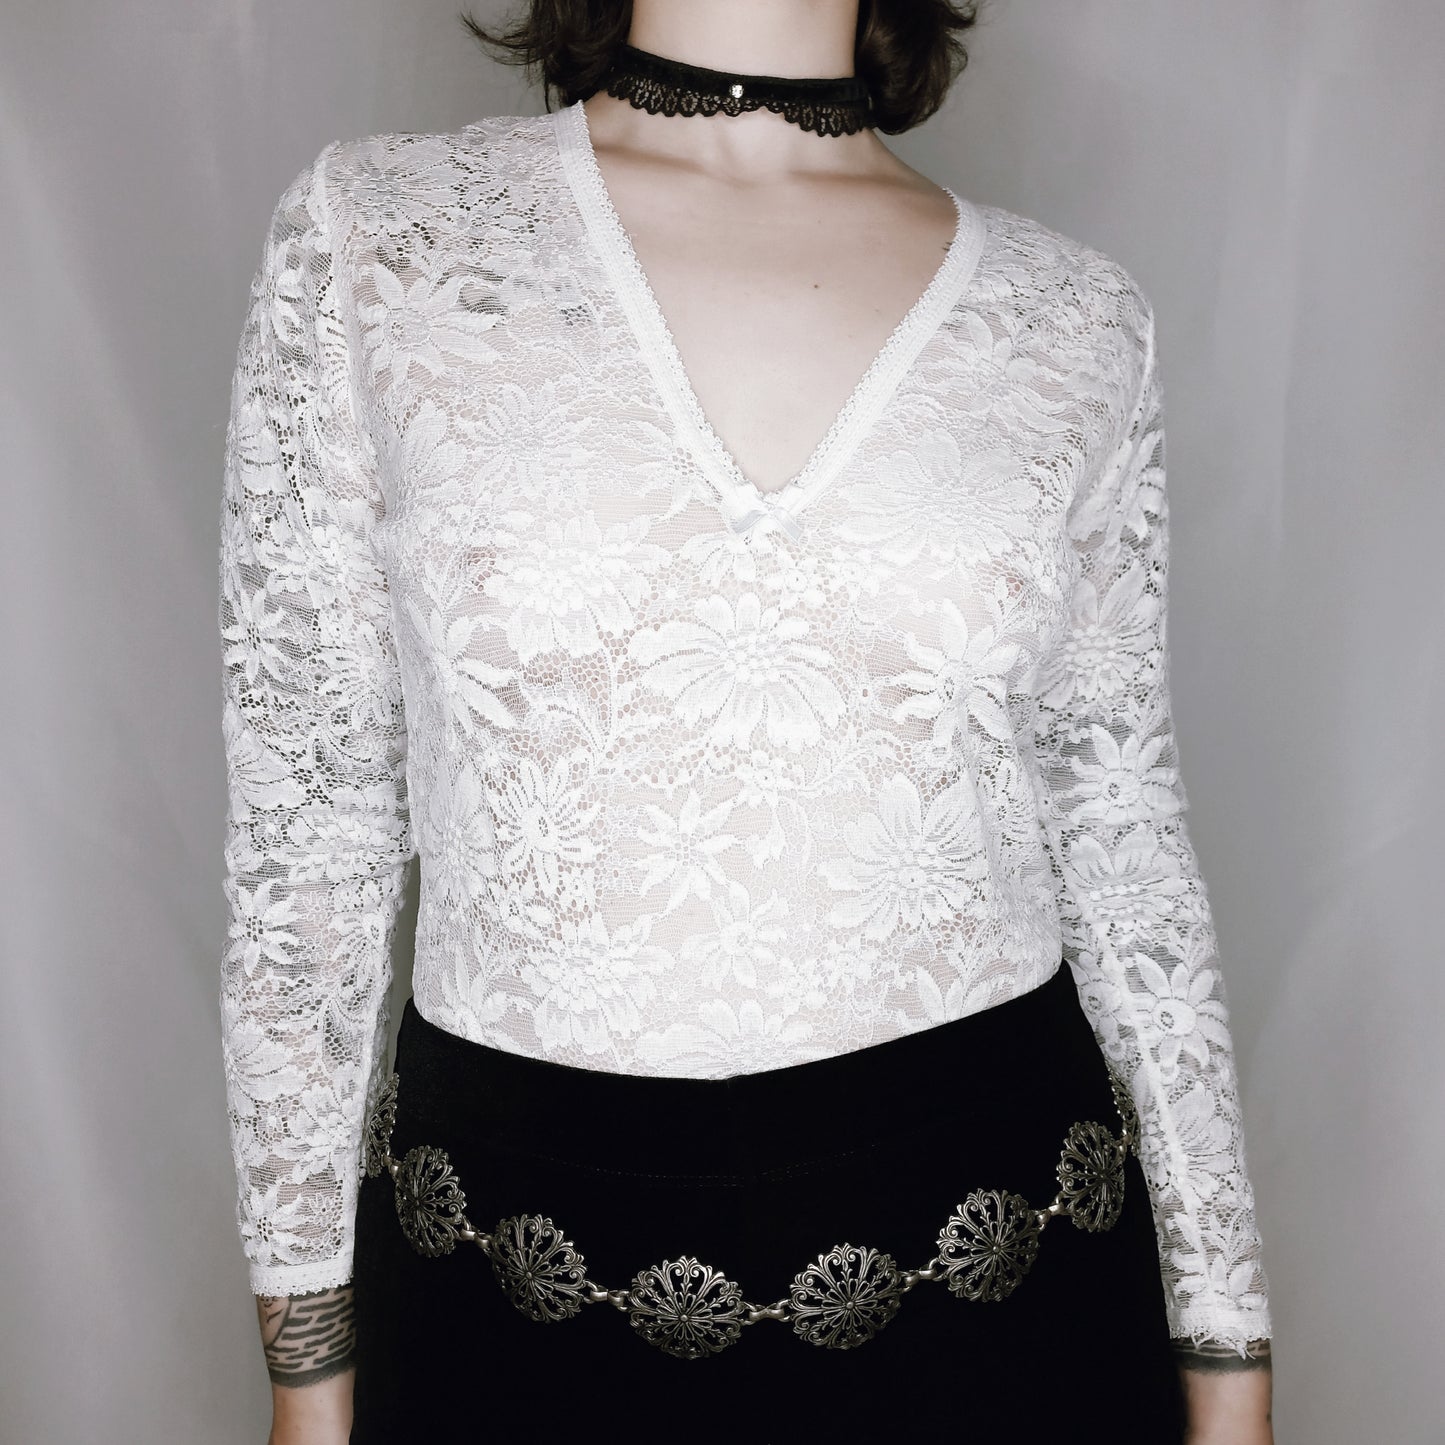 White Sheer Sweetheart Lace Top - M